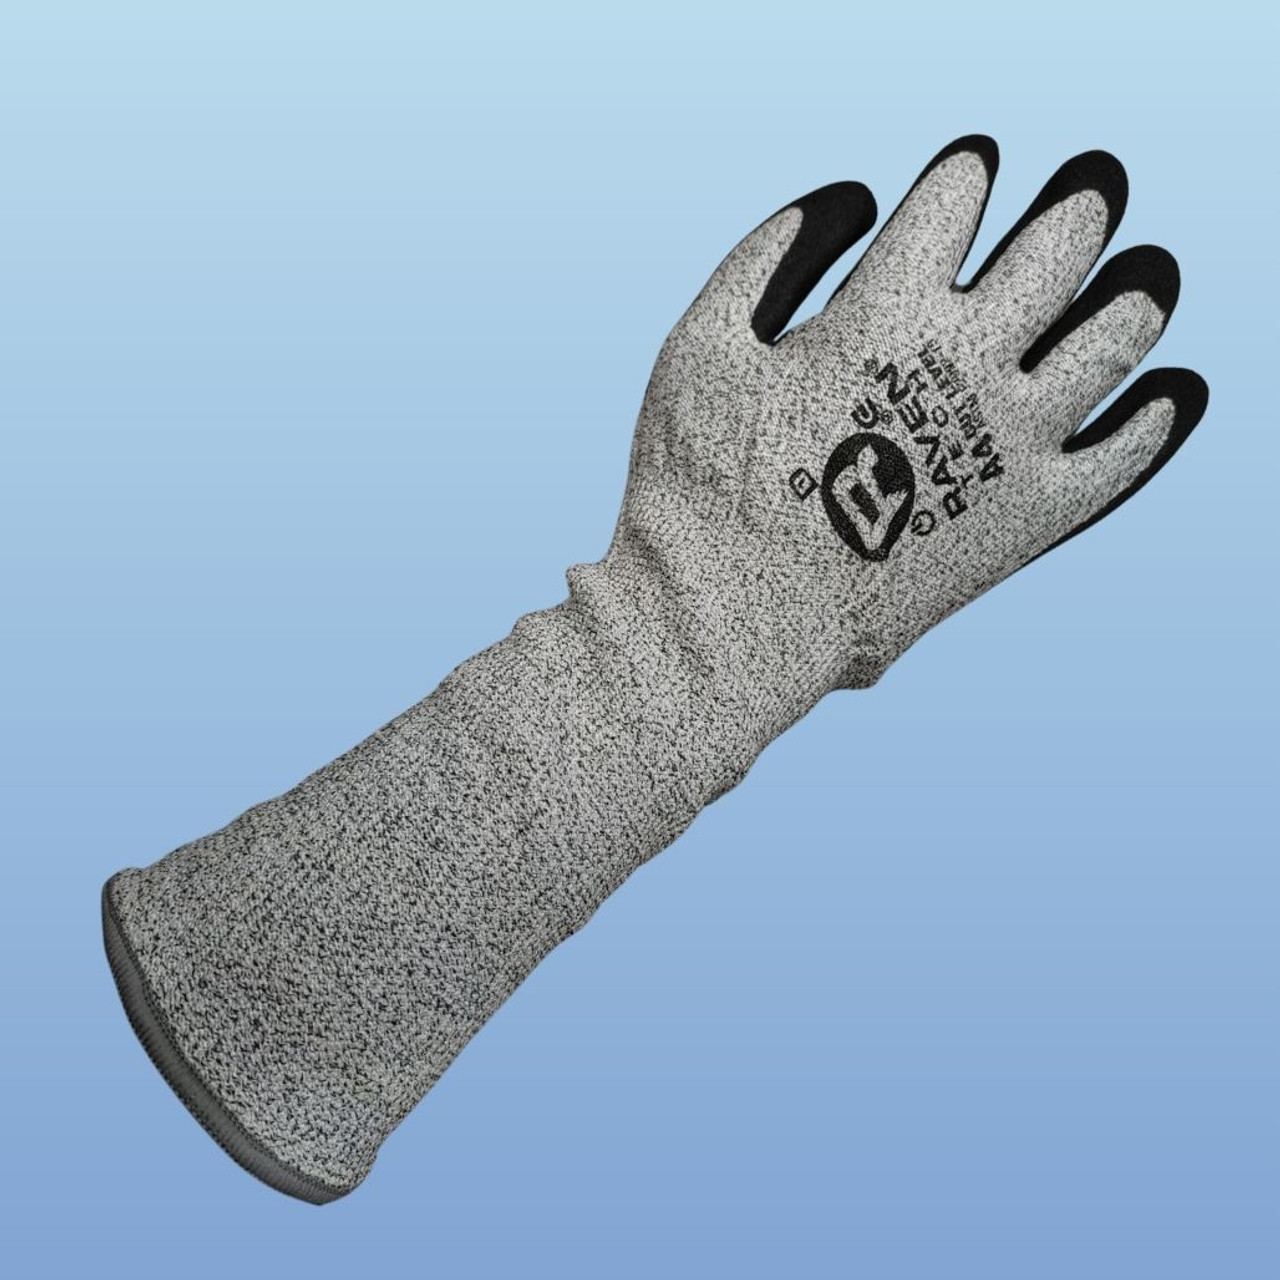 About Cut Resistant Gloves - ESD & Static Control Products